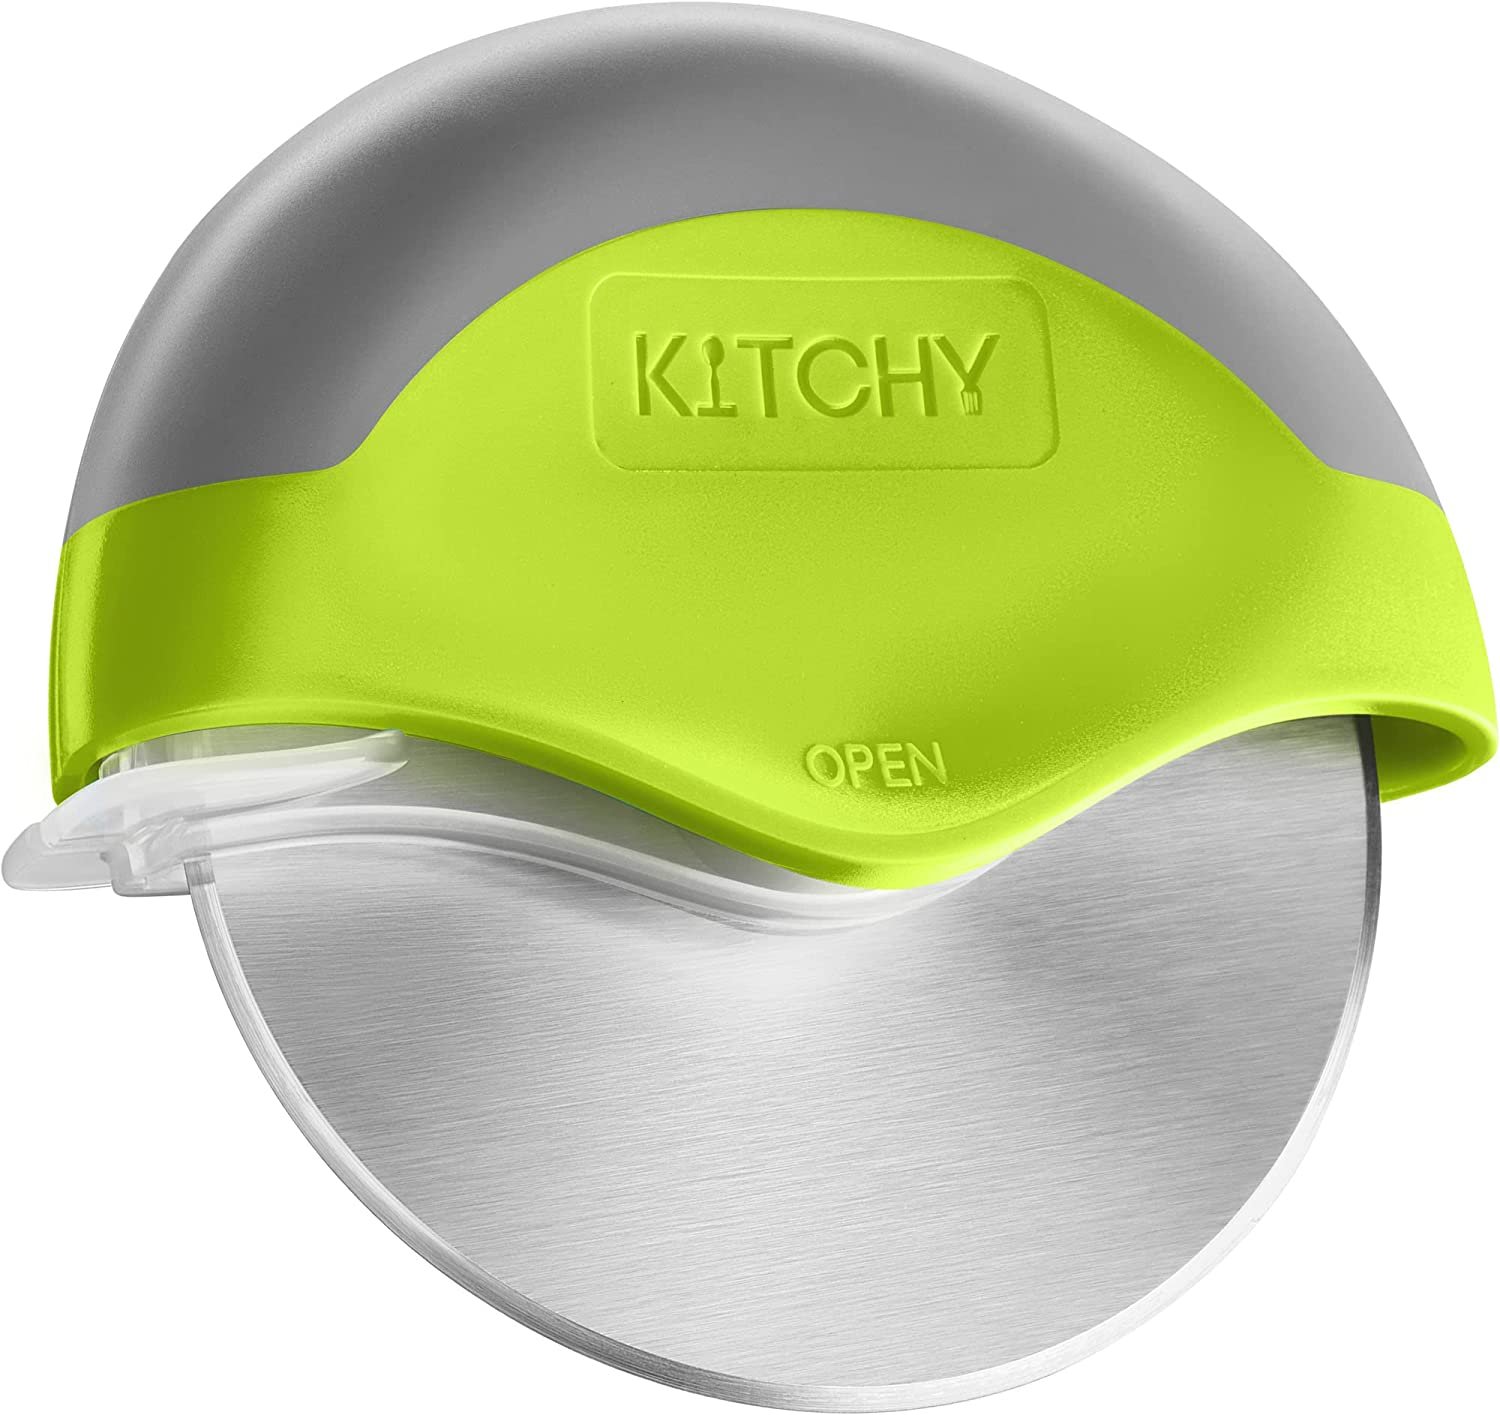 TikTok Made Me Buy It: 7 Must-Have Kitchen Gadgets